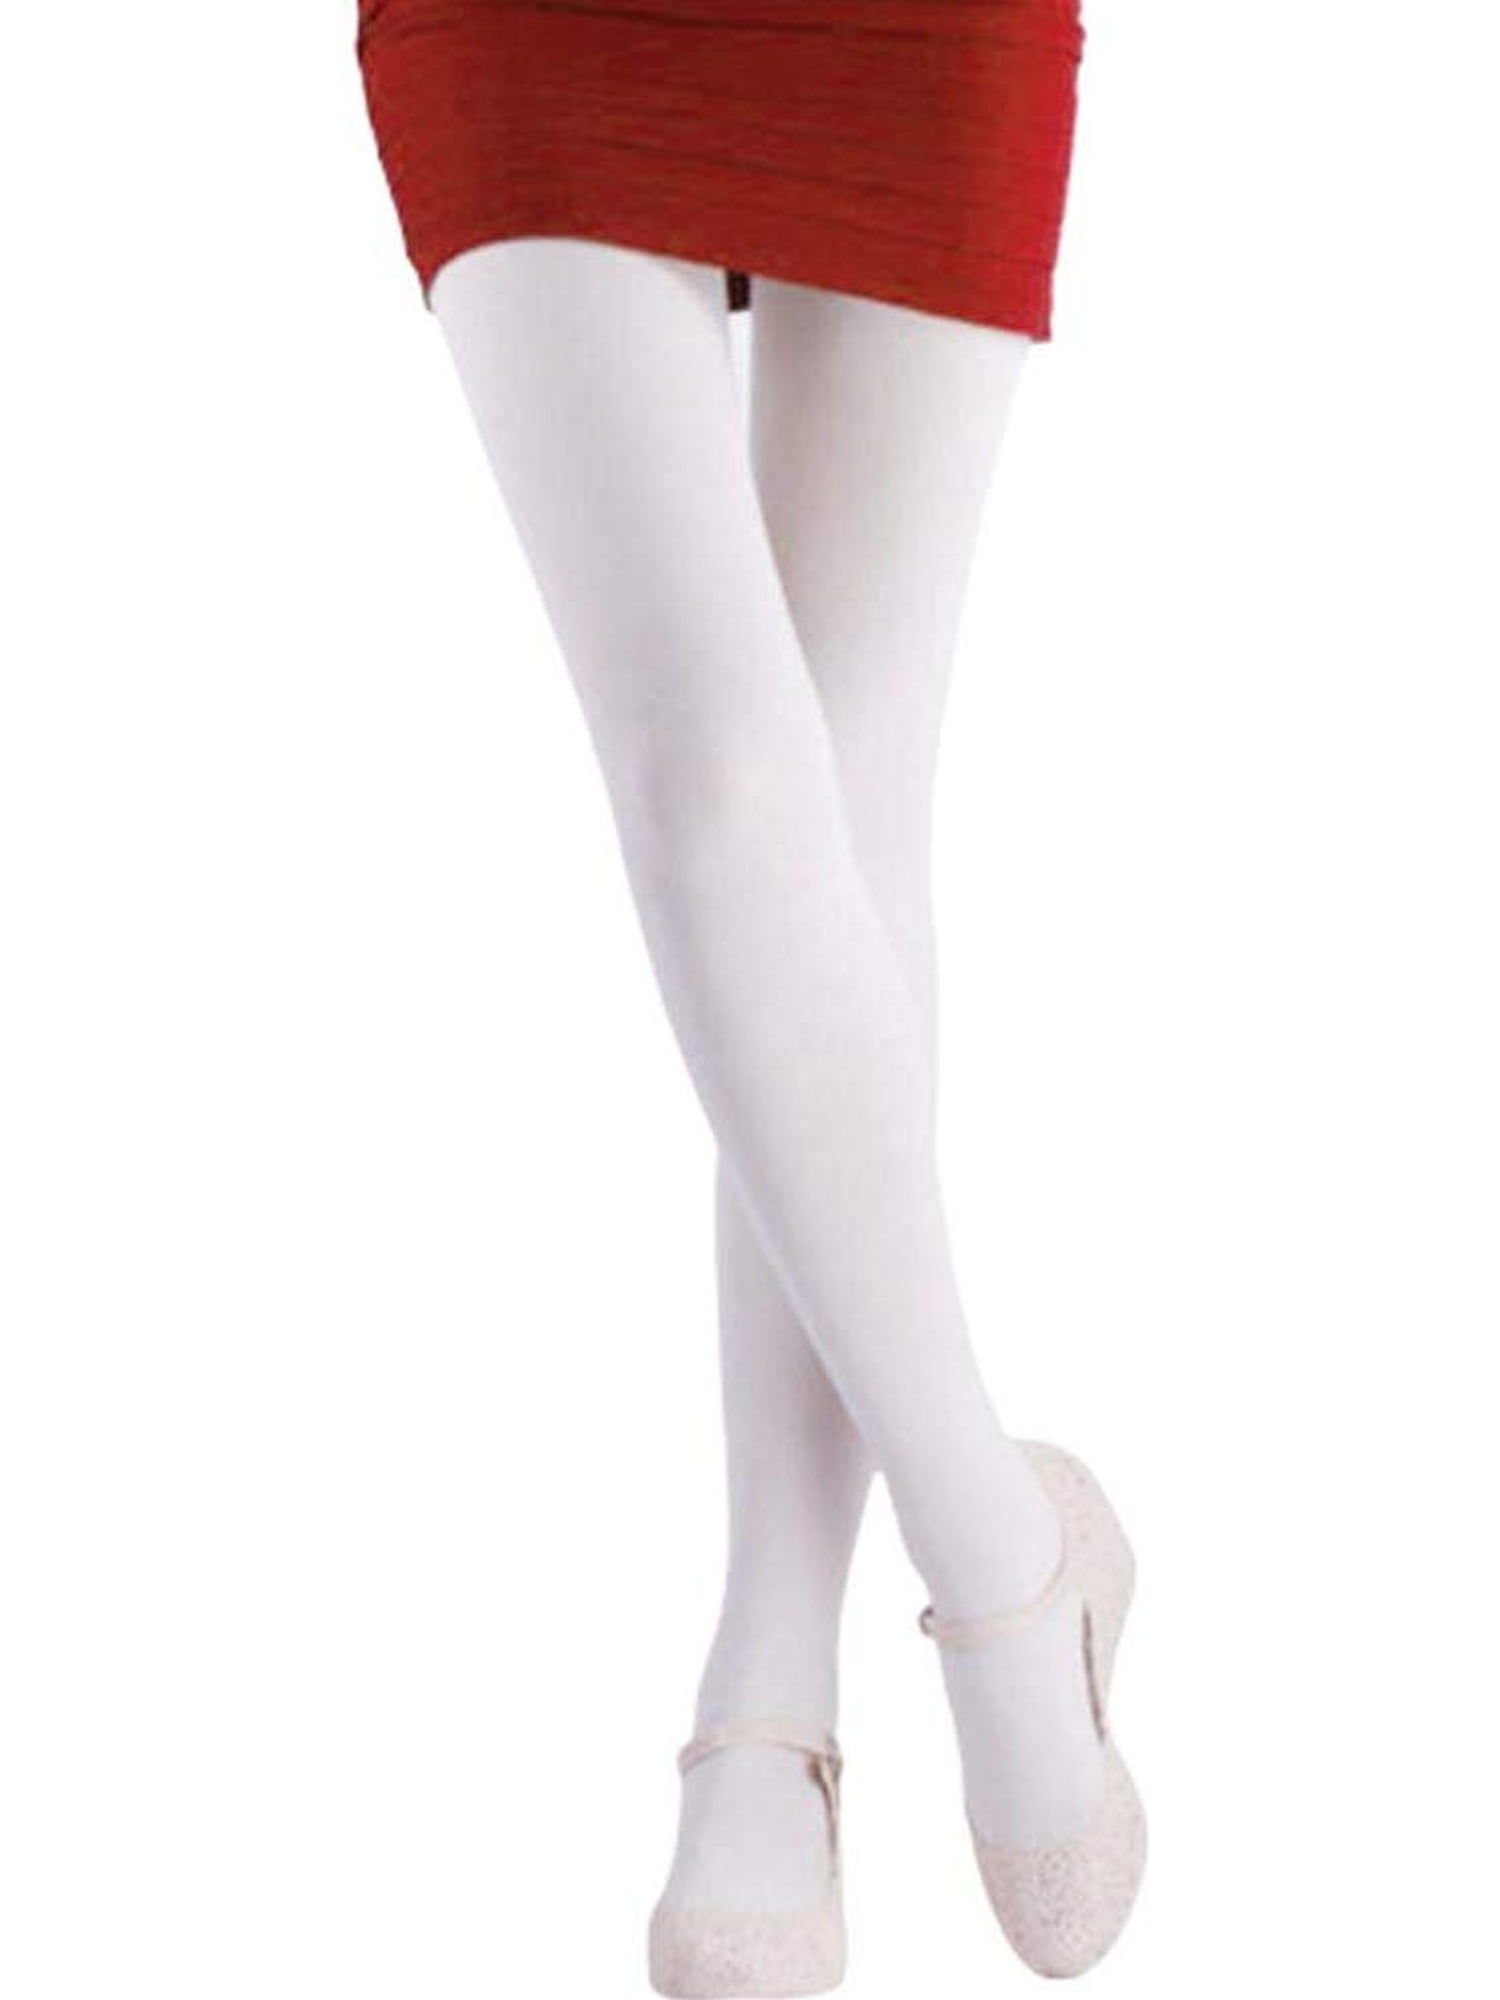 Diverse Candy Solid Color Fashion Sheer Transparent Pantyhose Tights Stockings 